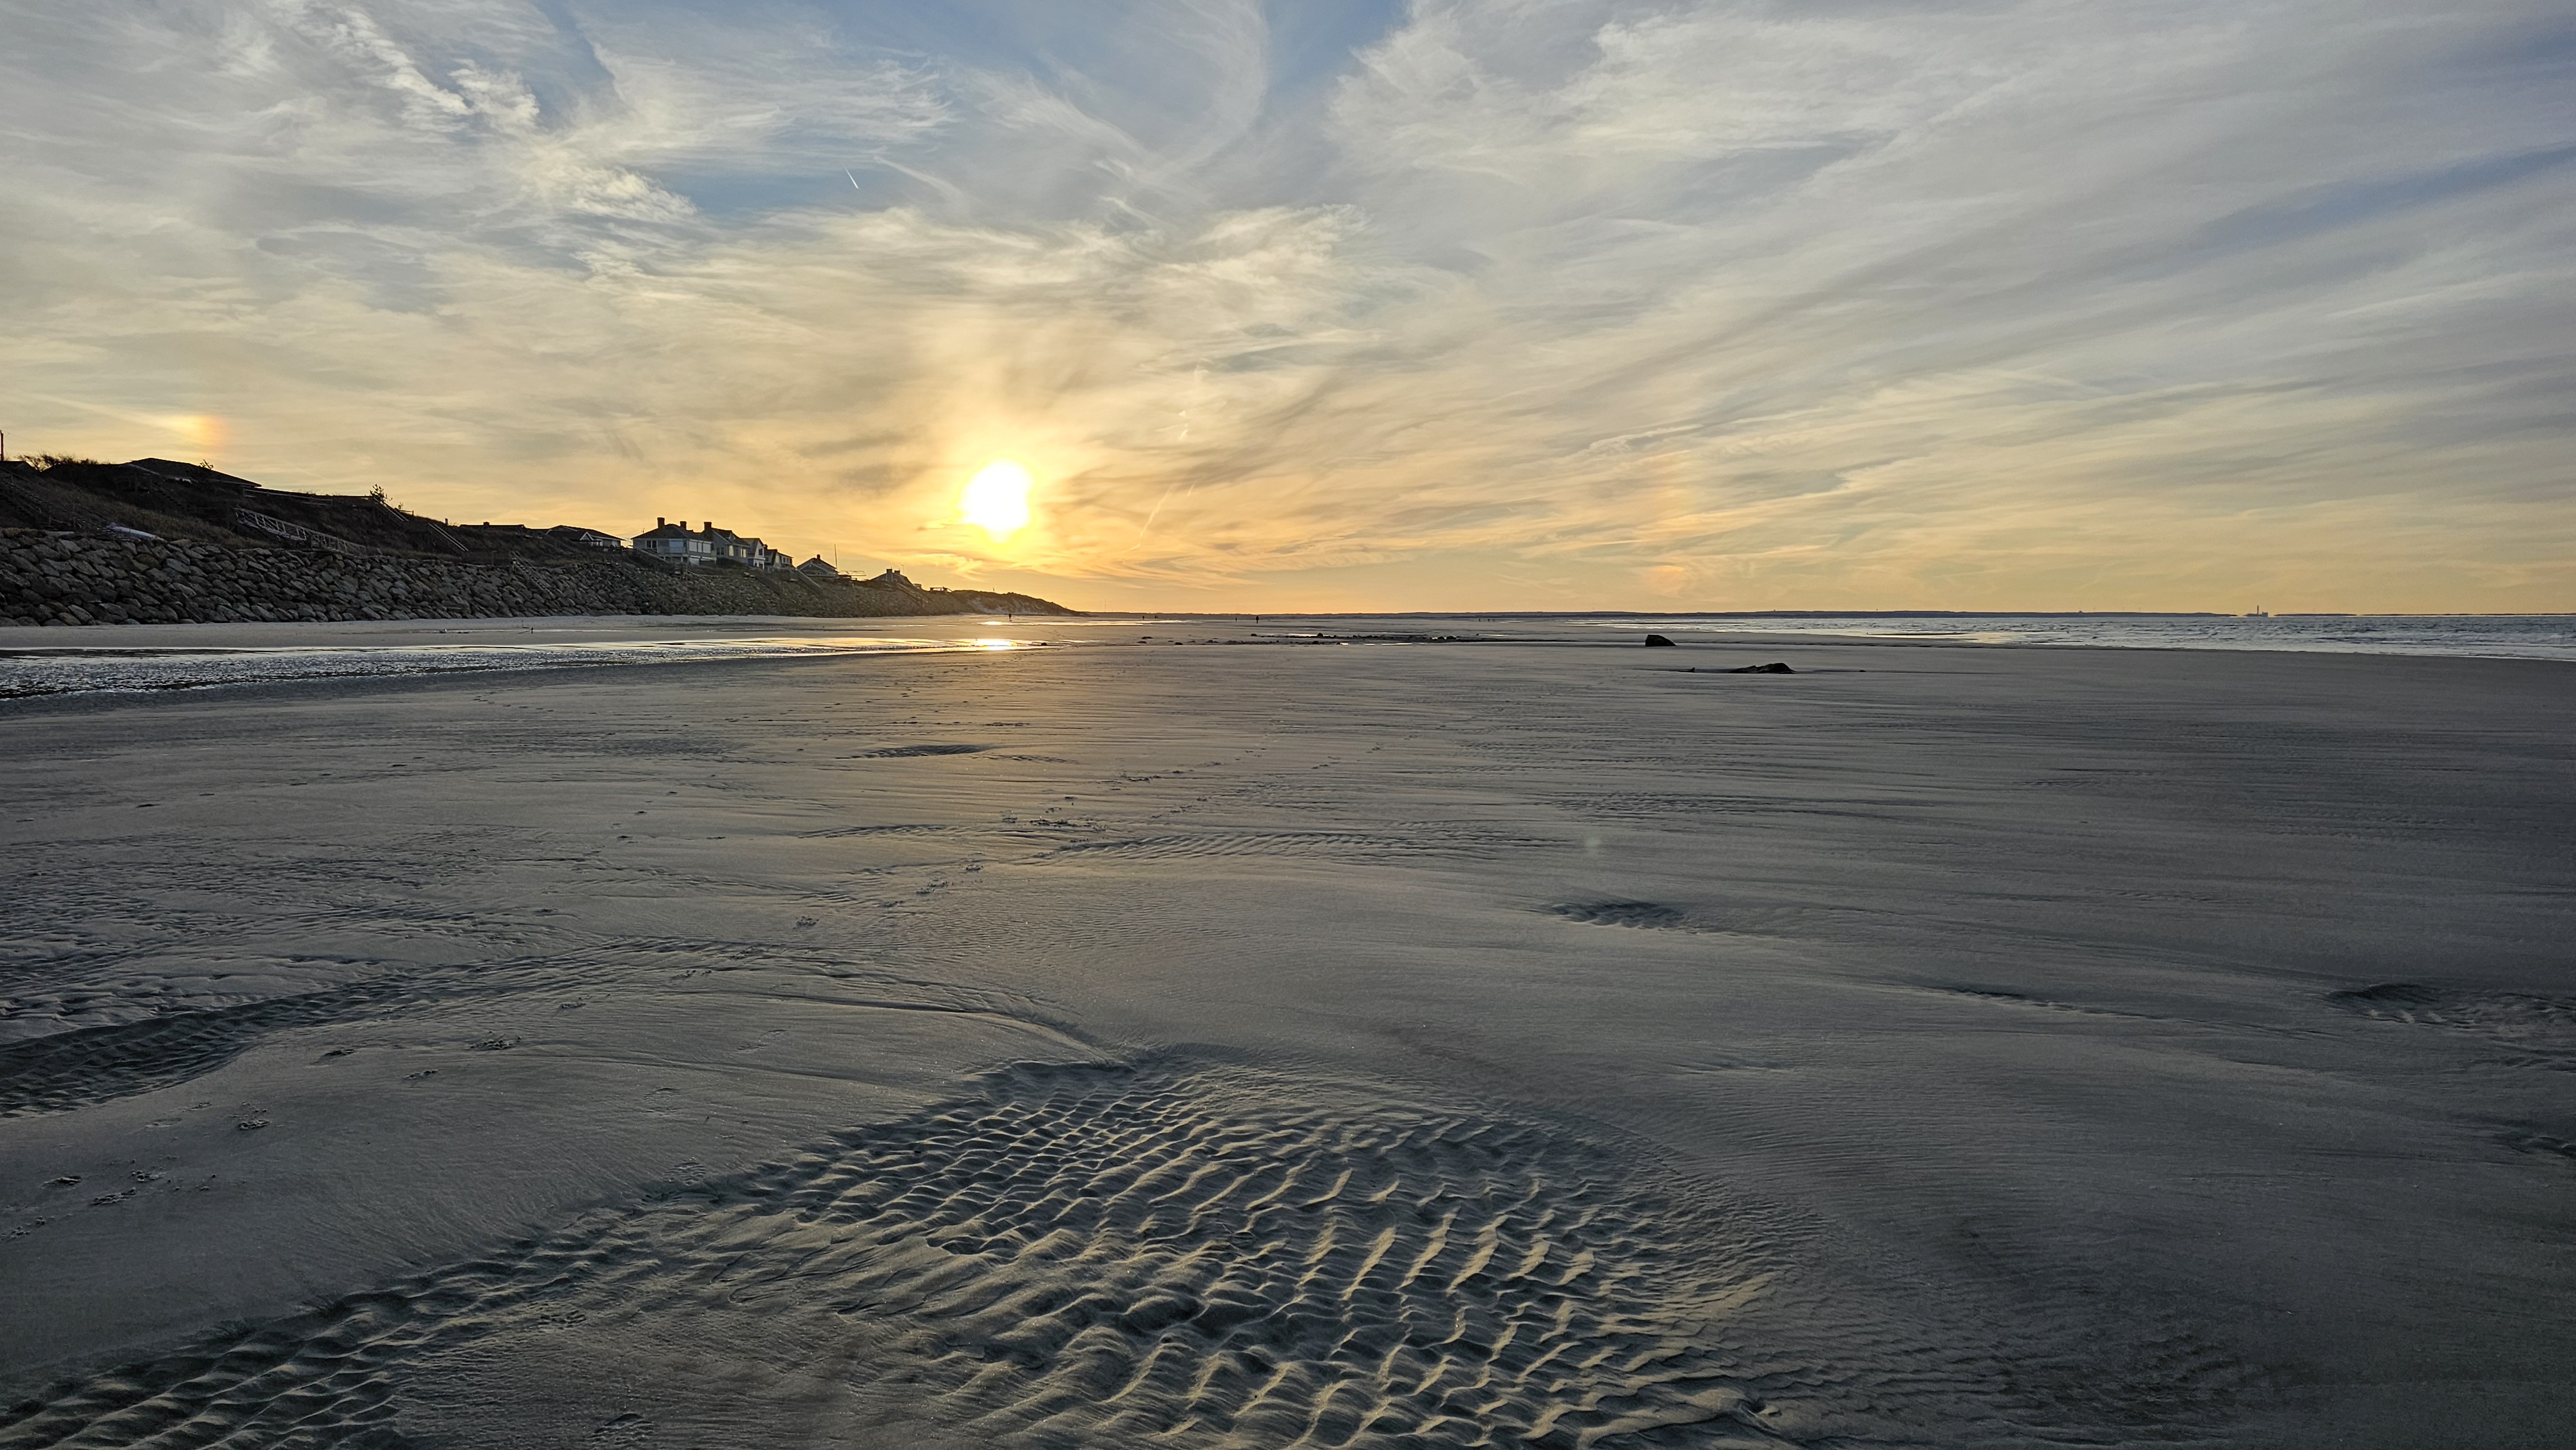 Another image of the sunrise on one of Cape Cod's beaches.